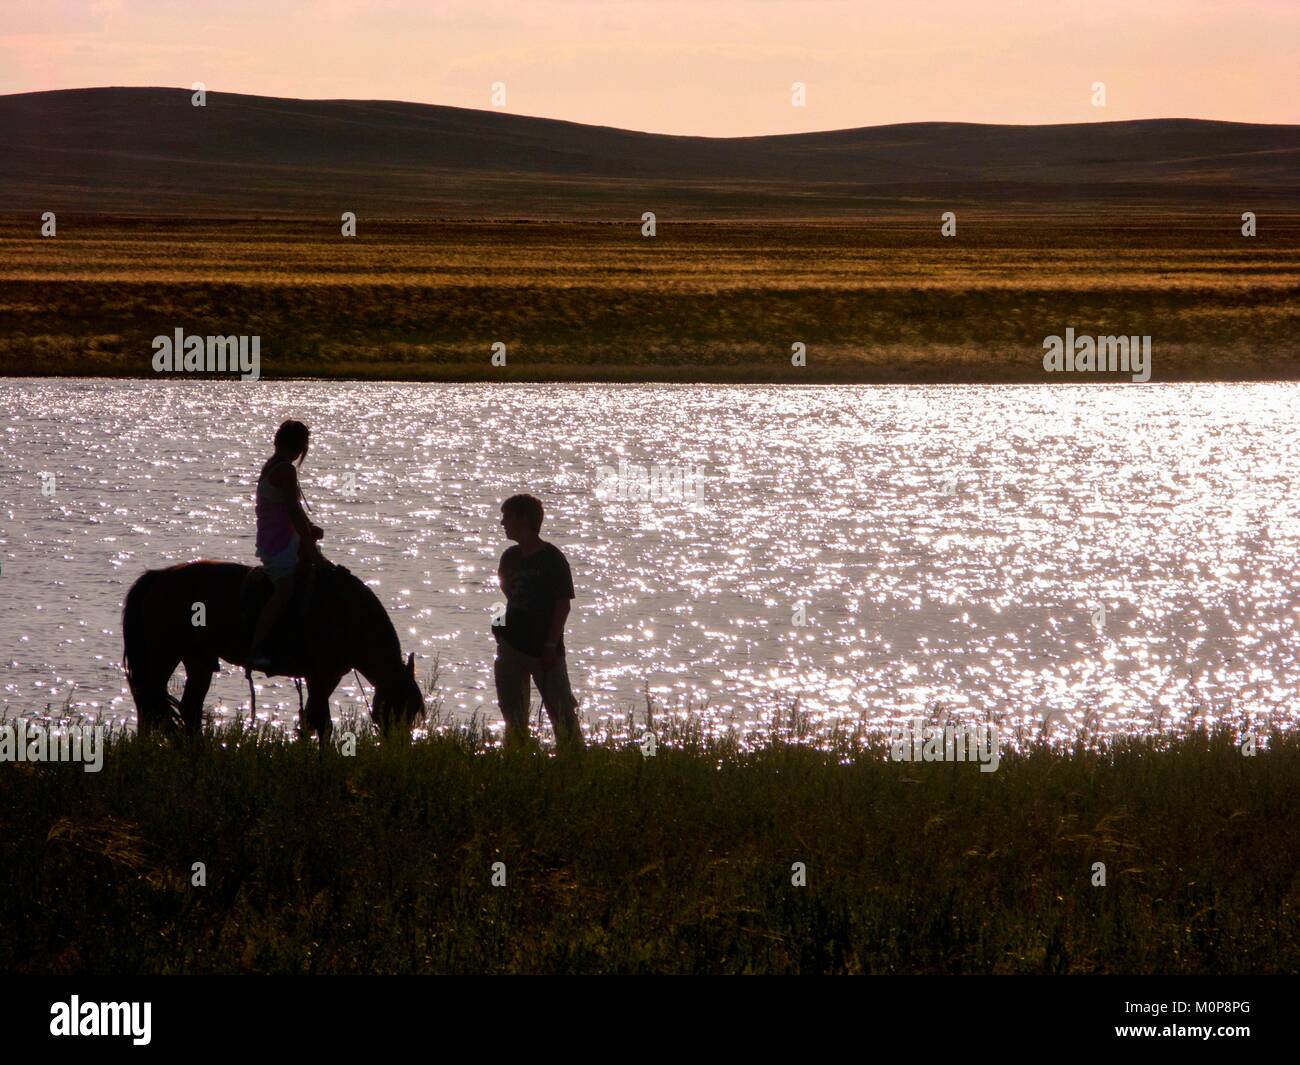 China,Inner Mongolia,20 kilometers west of the town of Ujimqin,central place for the Mongolian nomadic tribes,Mongolian horseback ride,a small but robust and domesticated animal,specific to the region Stock Photo